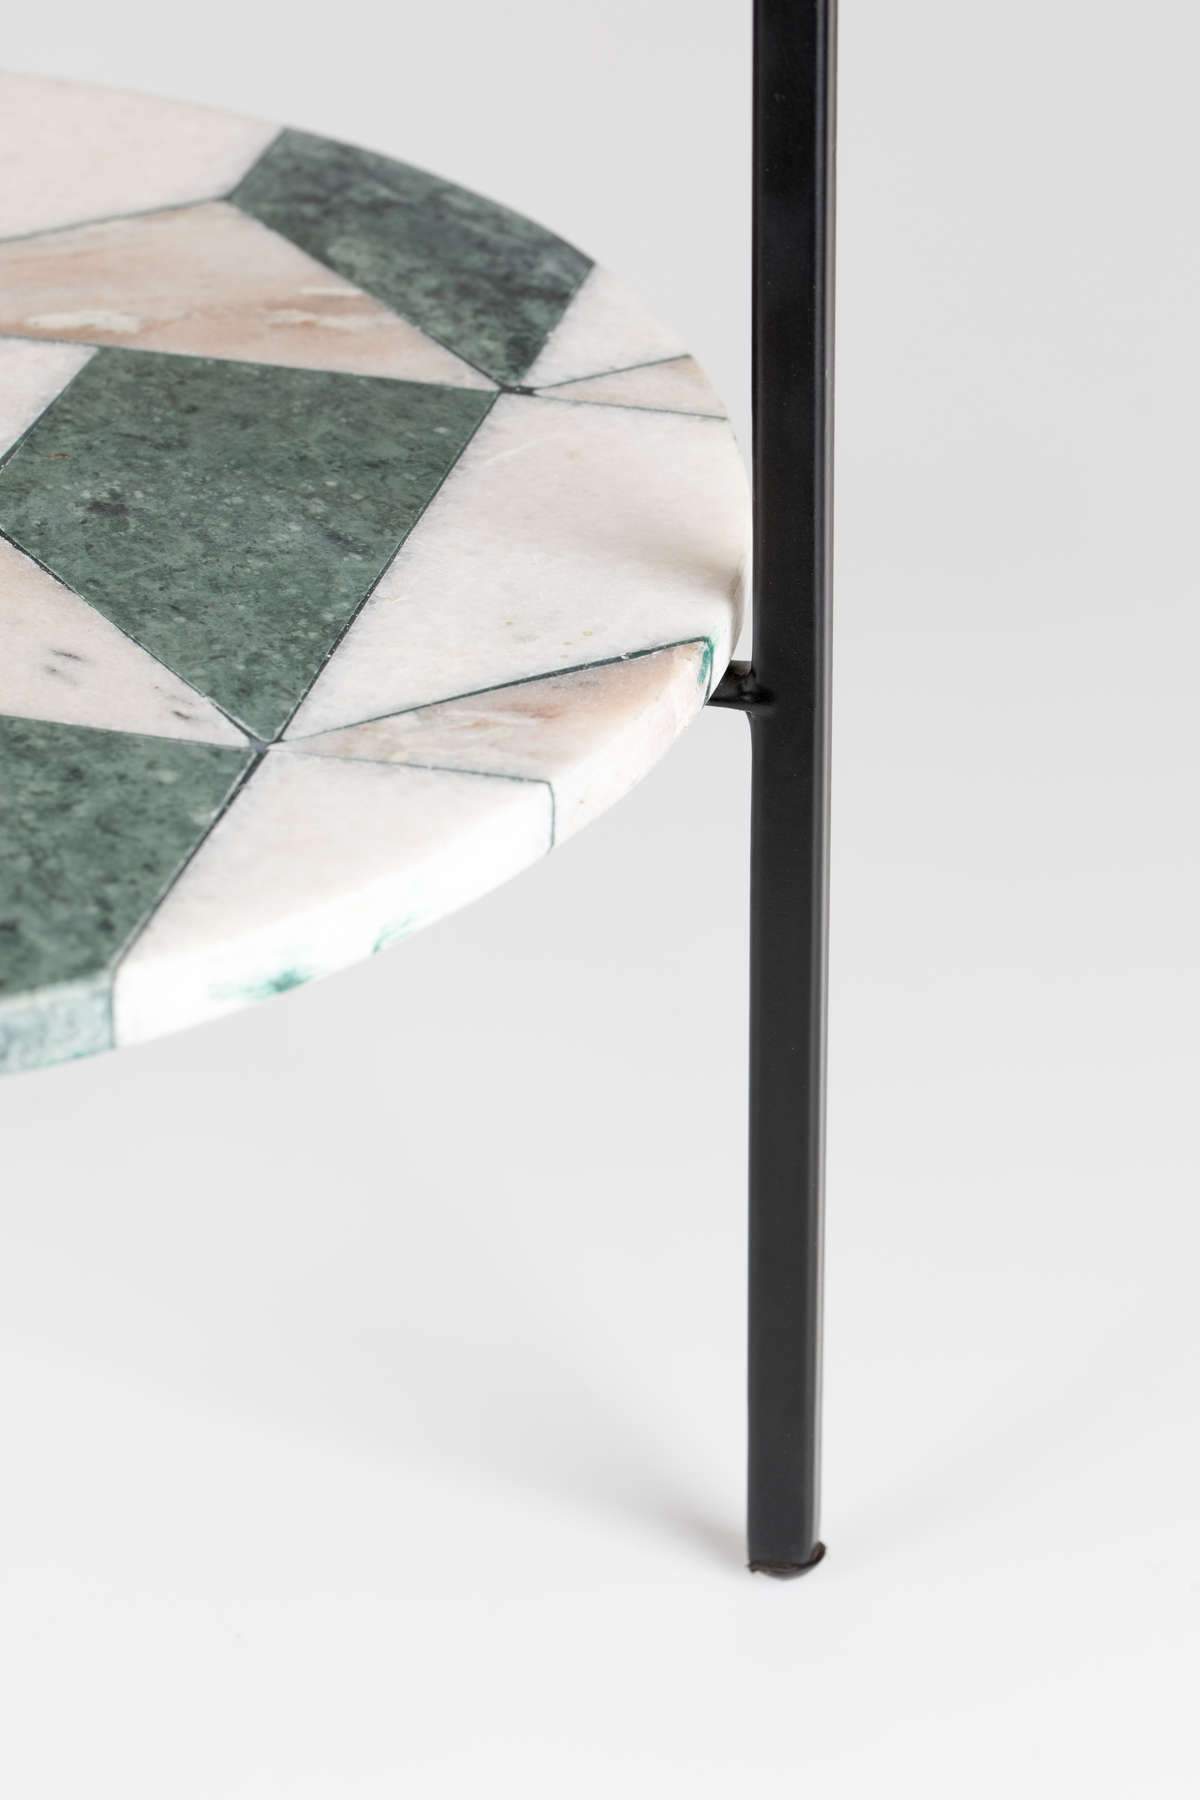 Marble tables are commonplace, we understand it. We present our playful nod to this trend - Bold Monkey Another Marble table. Think of him as a tuned version of the ordinary marble side table - not only in terms of appearance, but also in construction.